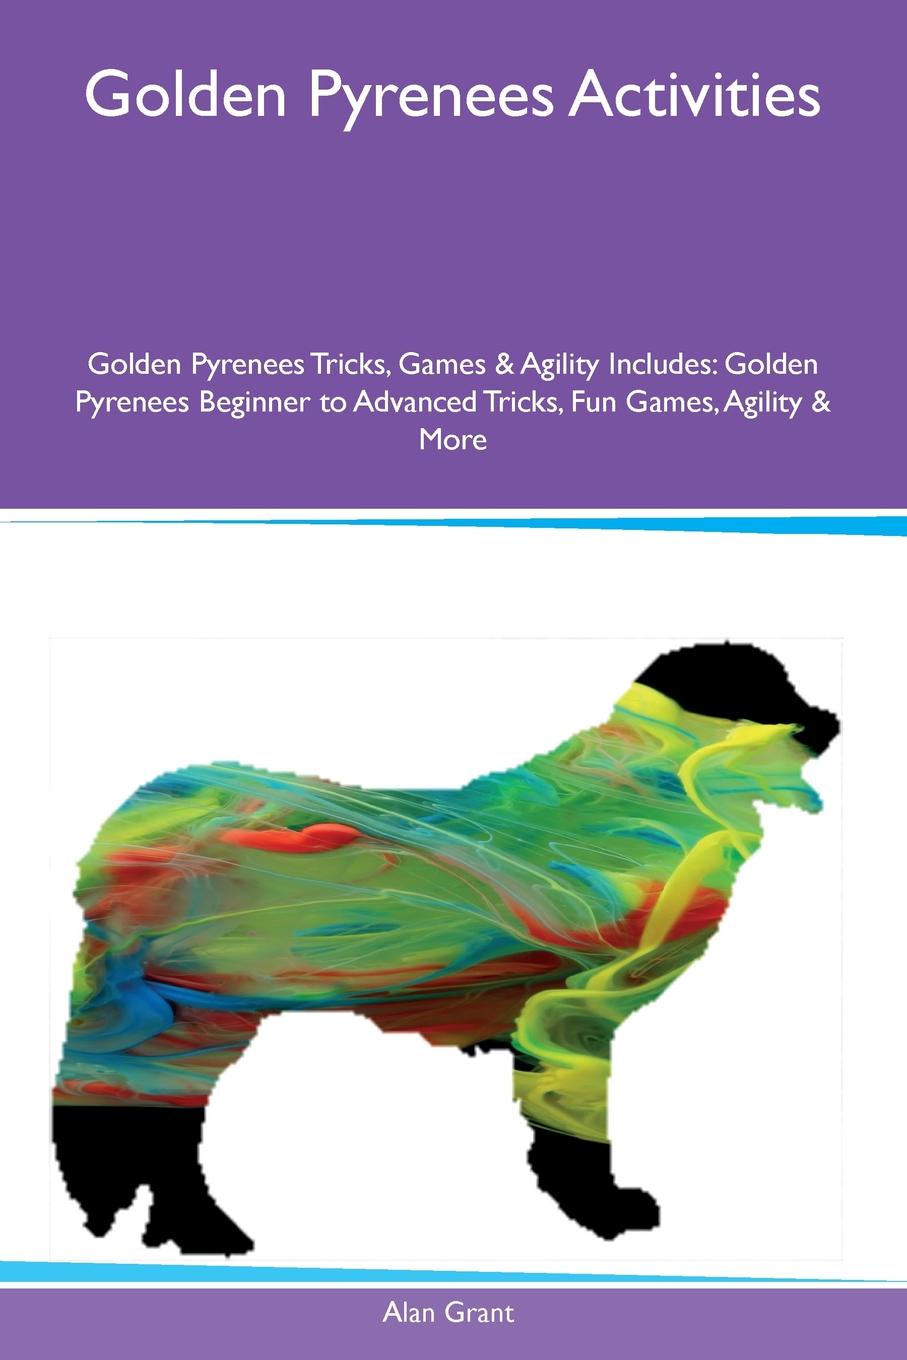 Golden Pyrenees Activities Golden Pyrenees Tricks, Games & Agility Includes. Golden Pyrenees Beginner to Advanced Tricks, Fun Games, Agility & More